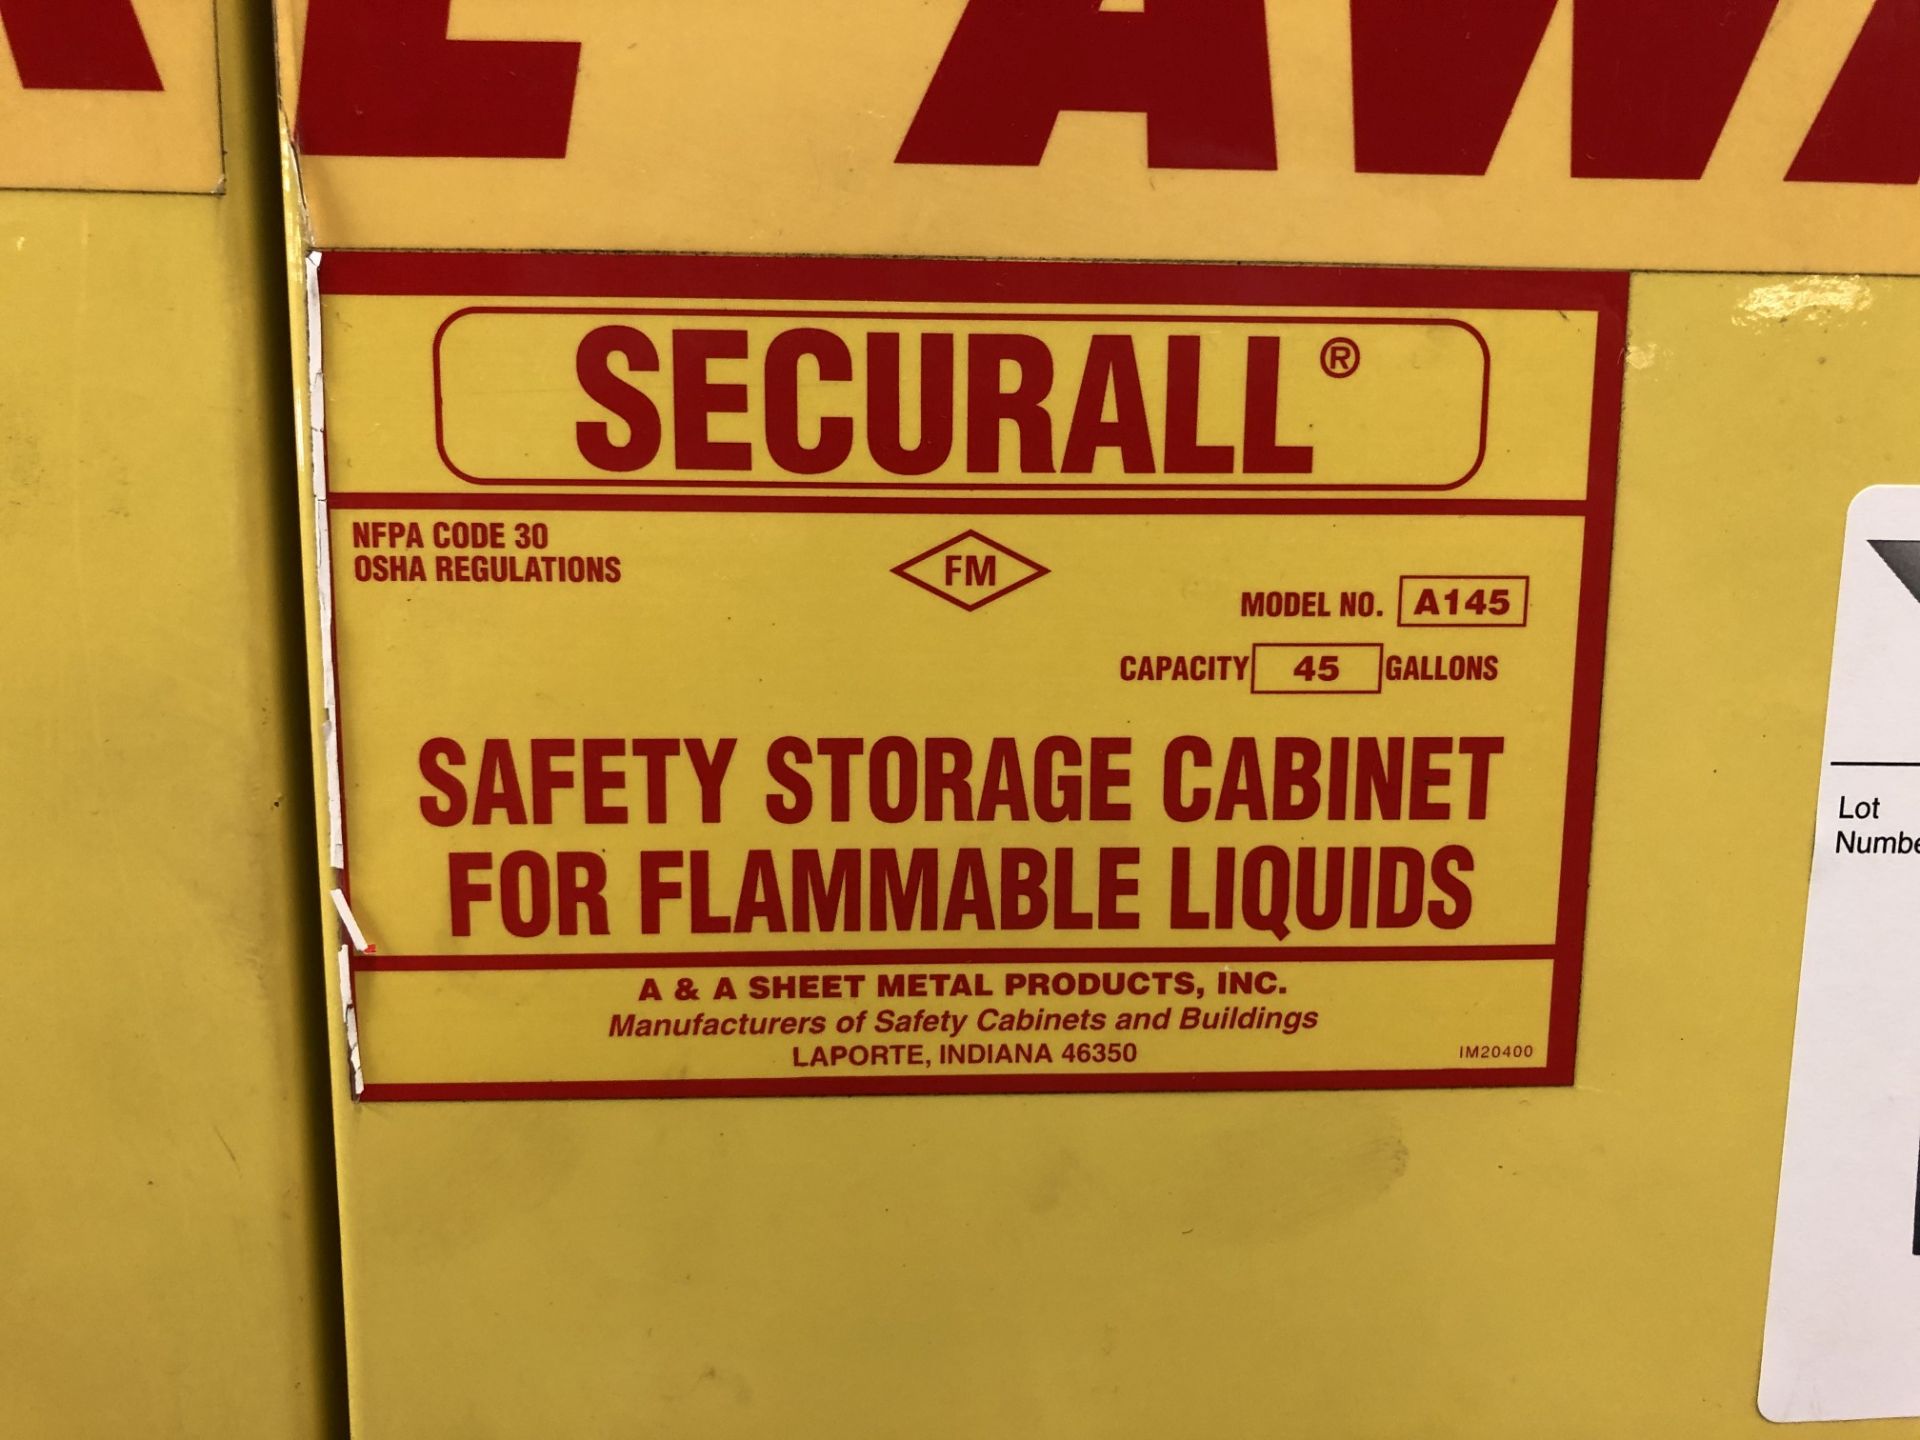 Securall Safety Storage Cabinet (43-1/4" W x 18-1/4" D x 66-1/2" H) - Image 4 of 4